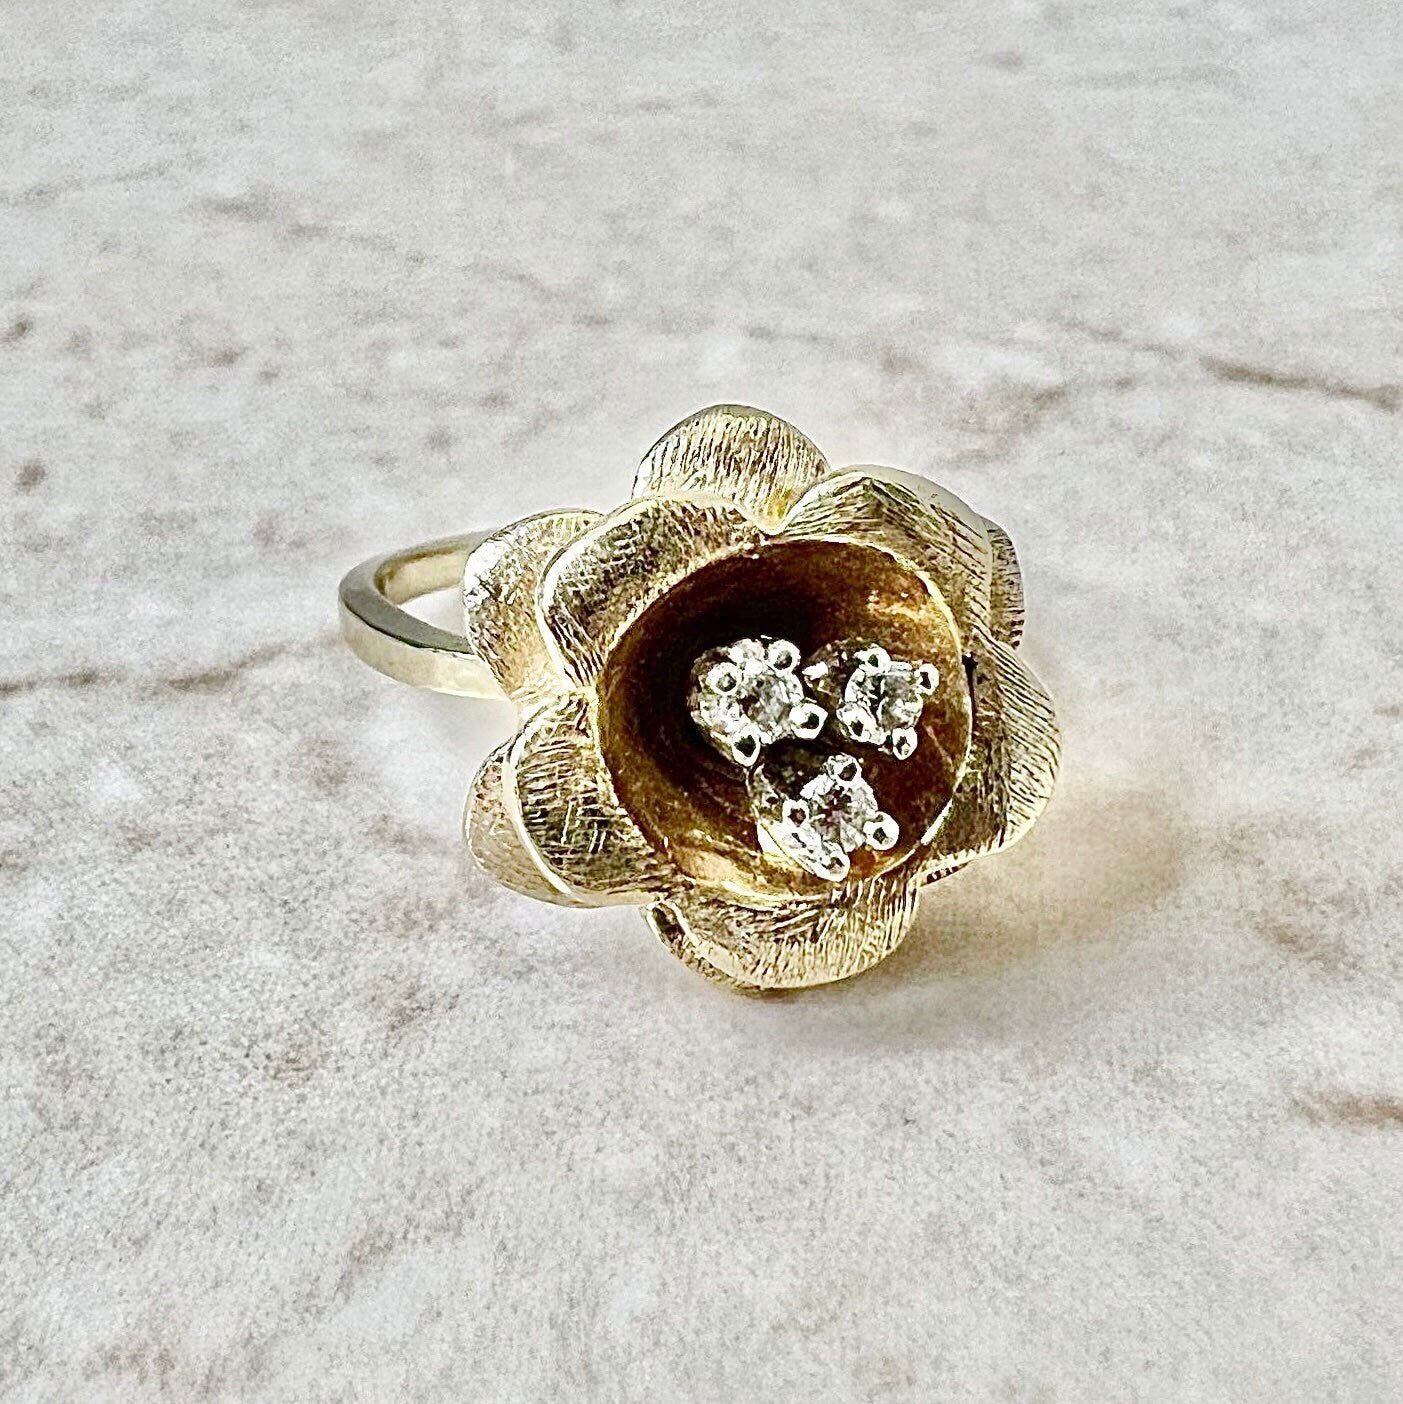 Vintage 14K Diamond Flower Cocktail Ring - Yellow Gold Diamond Ring - Statement Ring - Birthday Gift - Christmas Gift - Holiday Gift